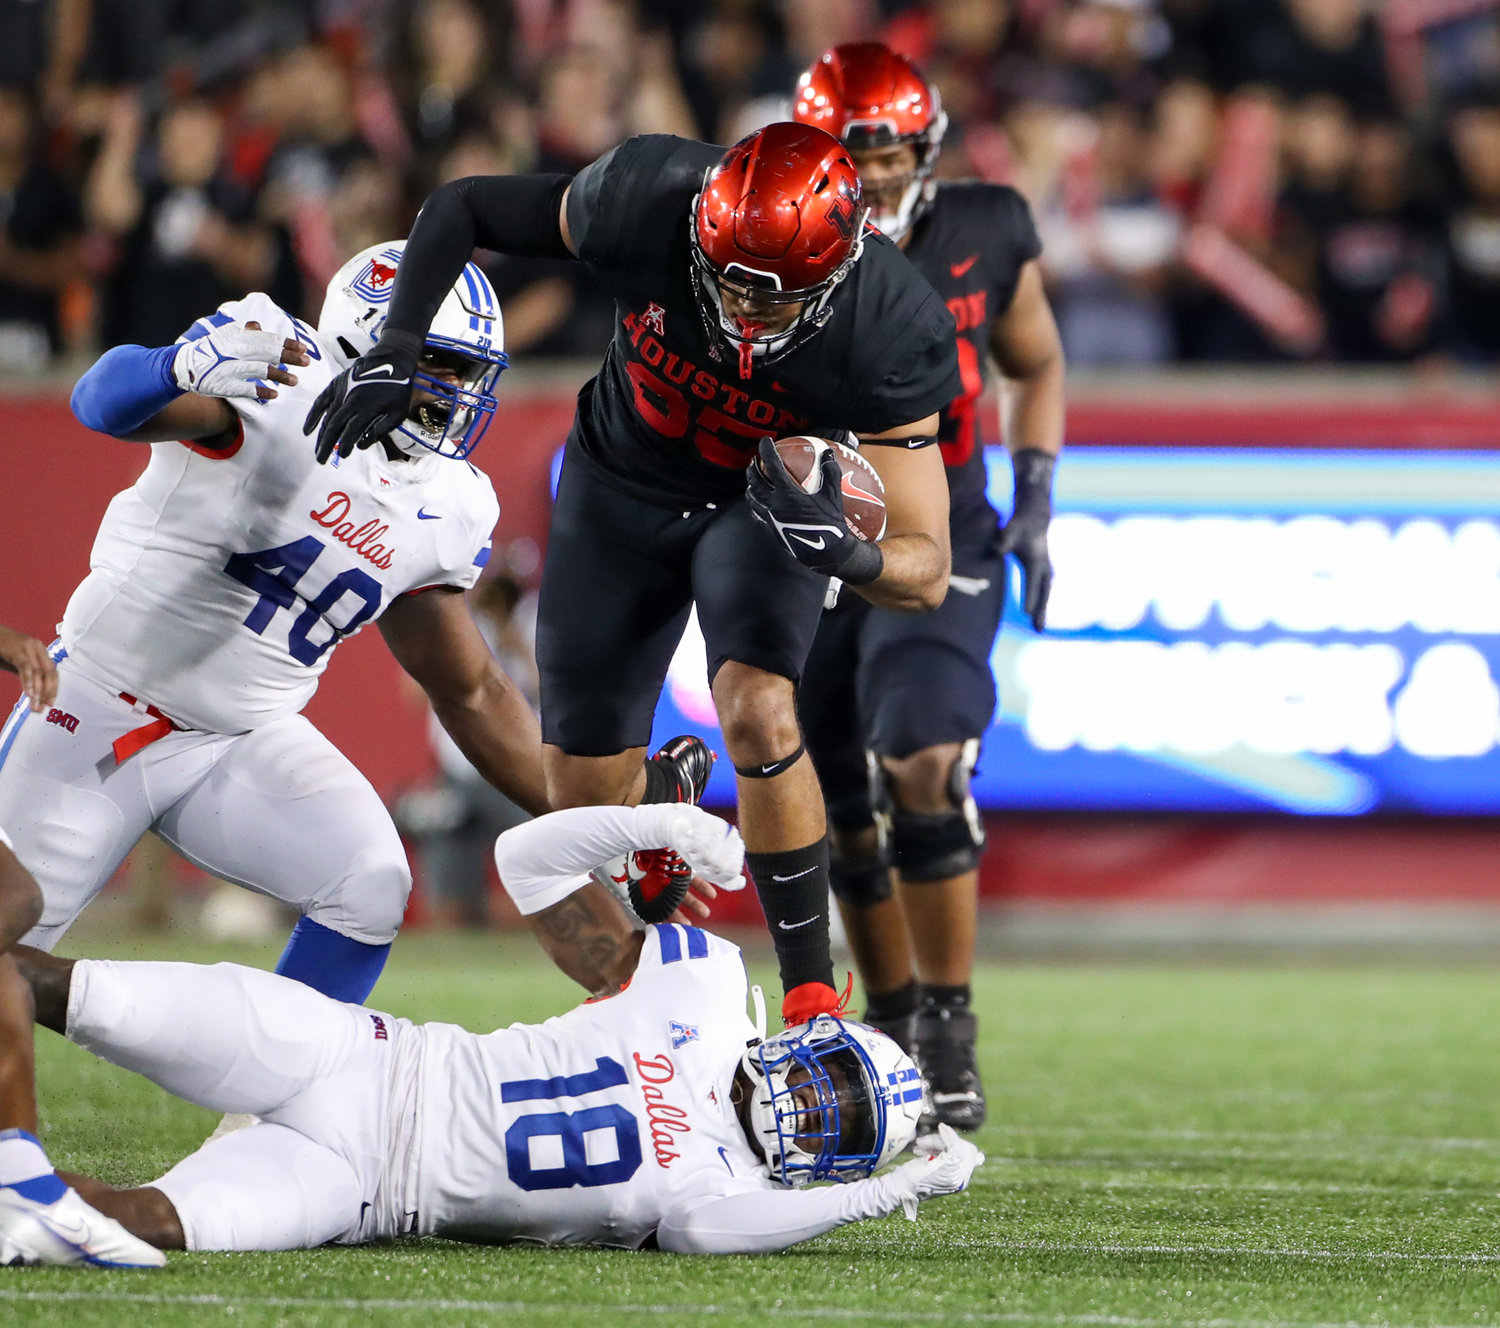 Houston Cougars tight end Christian Trahan (85) steps over SMU Mustangs safety Chace Cromartie (18) on a carry during an NCAA football game between Houston and SMU on October 30, 2021 in Houston, Texas.